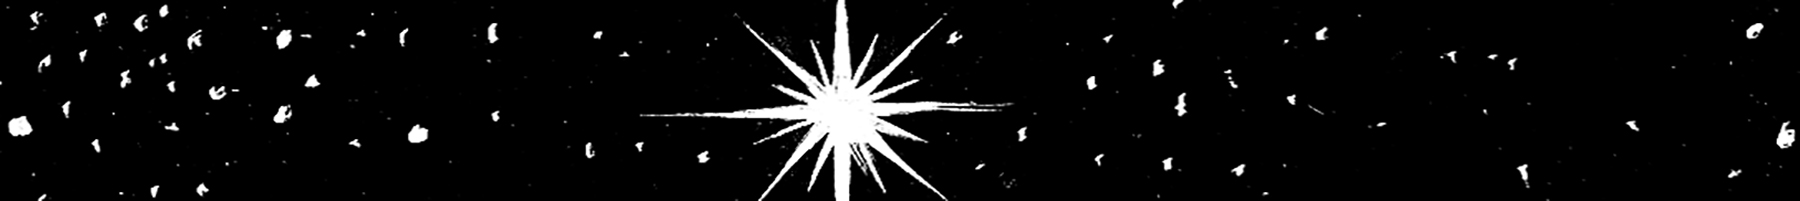 black and white linoleum cut of a star